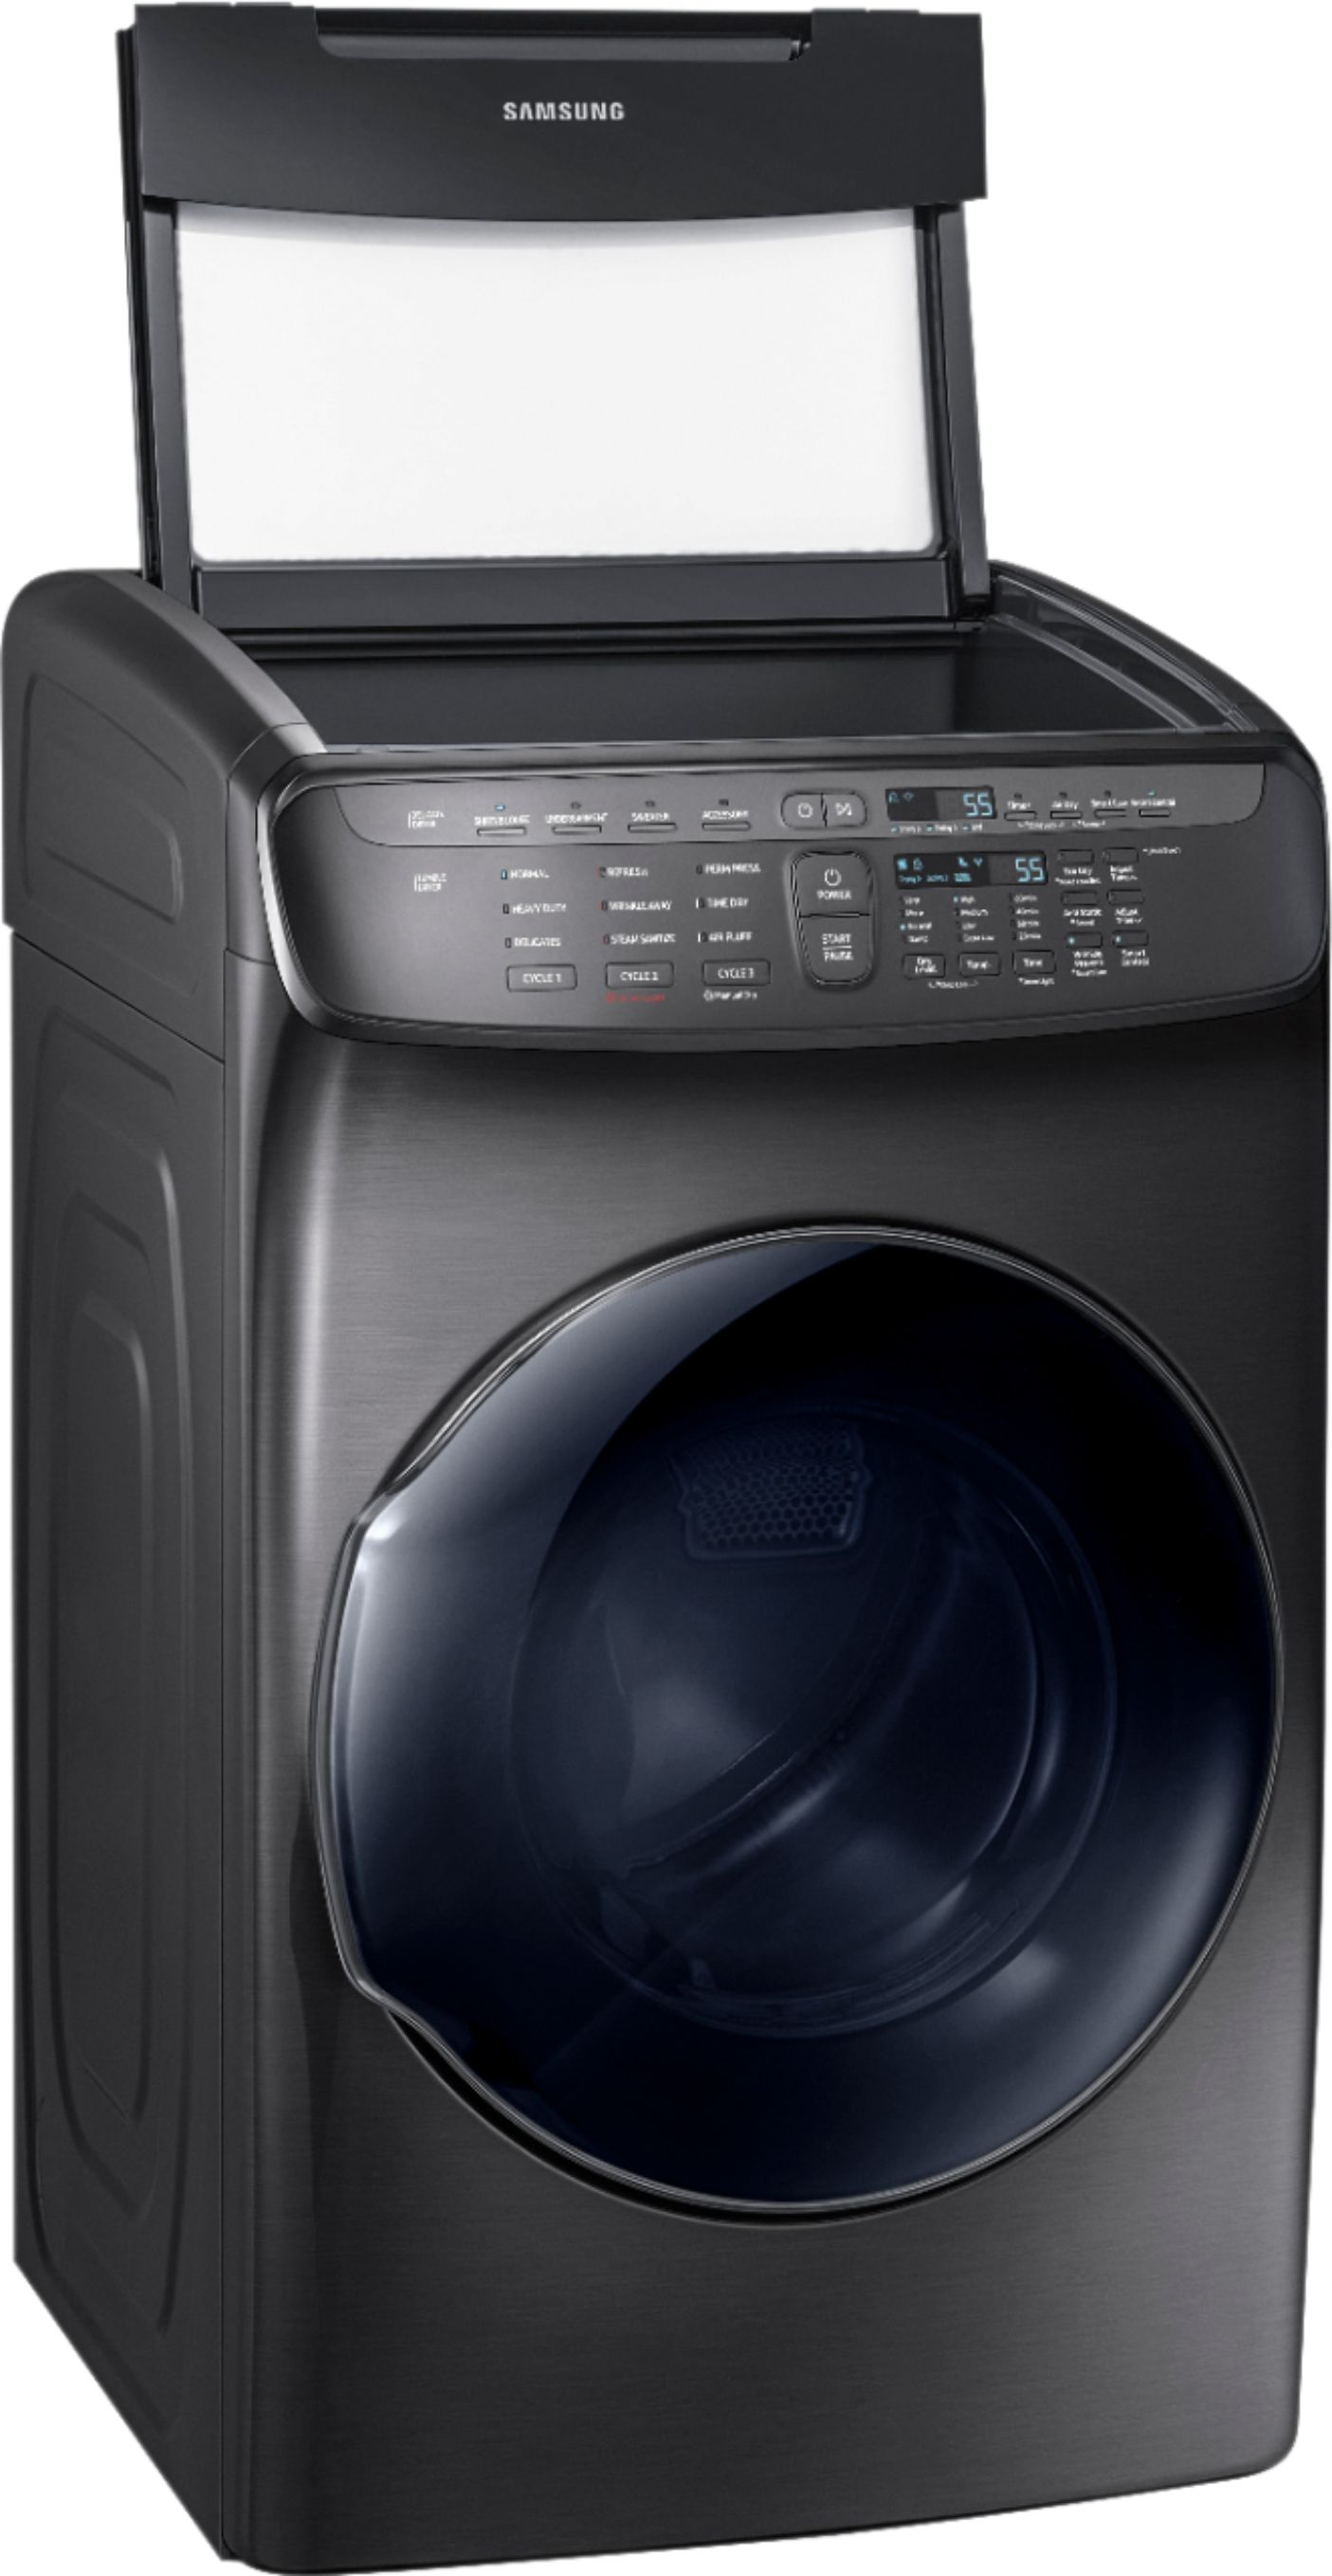 Angle View: Samsung - 7.5 Cu. Ft. Gas Dryer with Steam and FlexDry - Fingerprint Resistant Black Stainless Steel